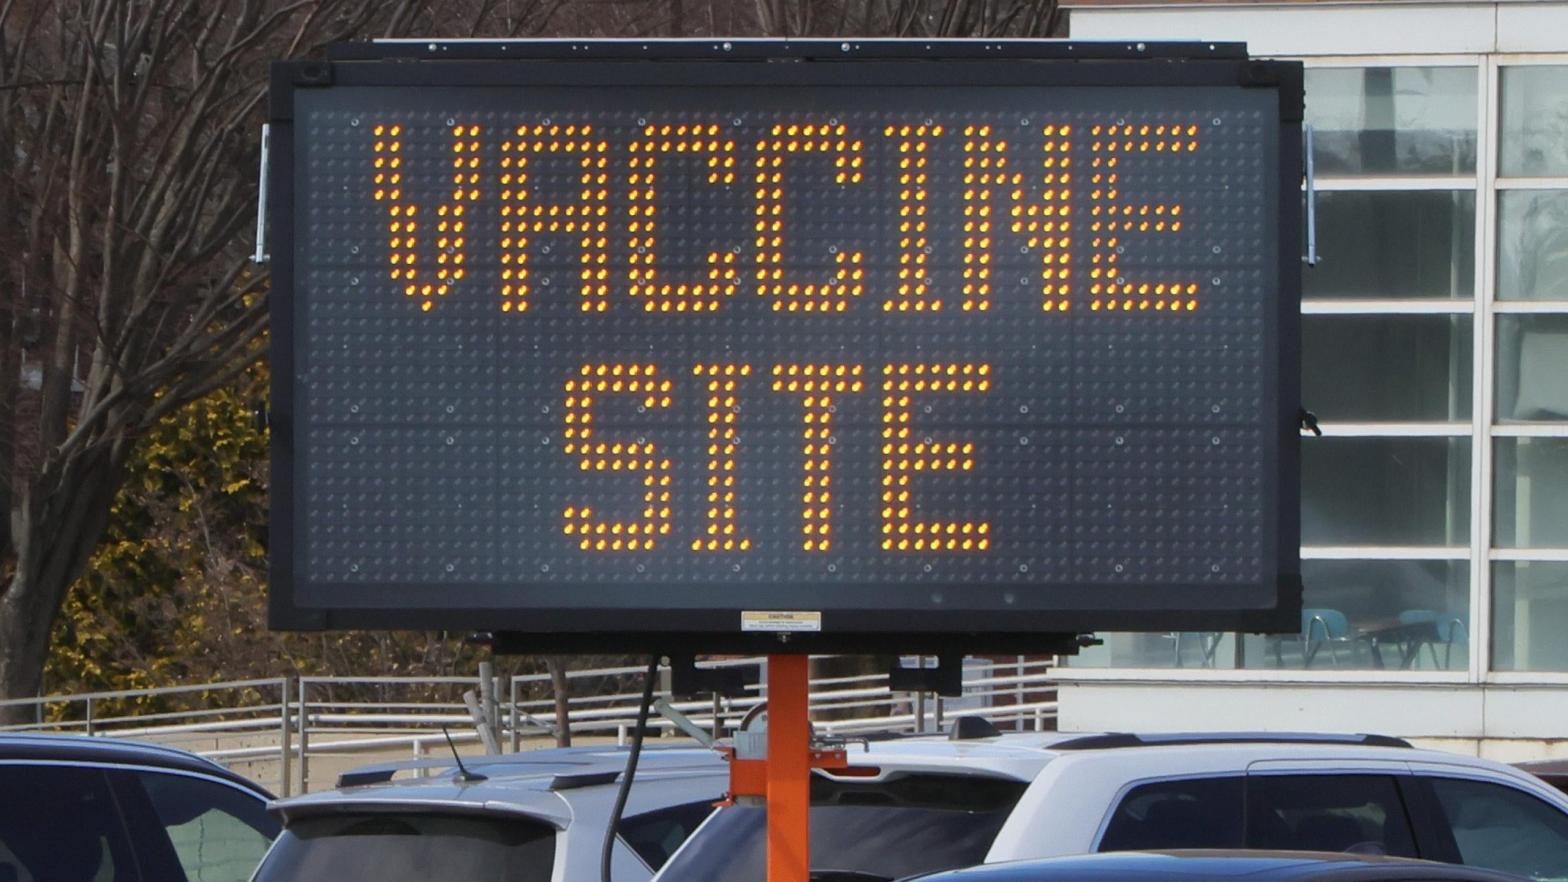 A covid-19 vaccination site at Nassau Community College on January 10, 2021 in Garden City, New York.  (Photo: Bruce Bennett, Getty Images)